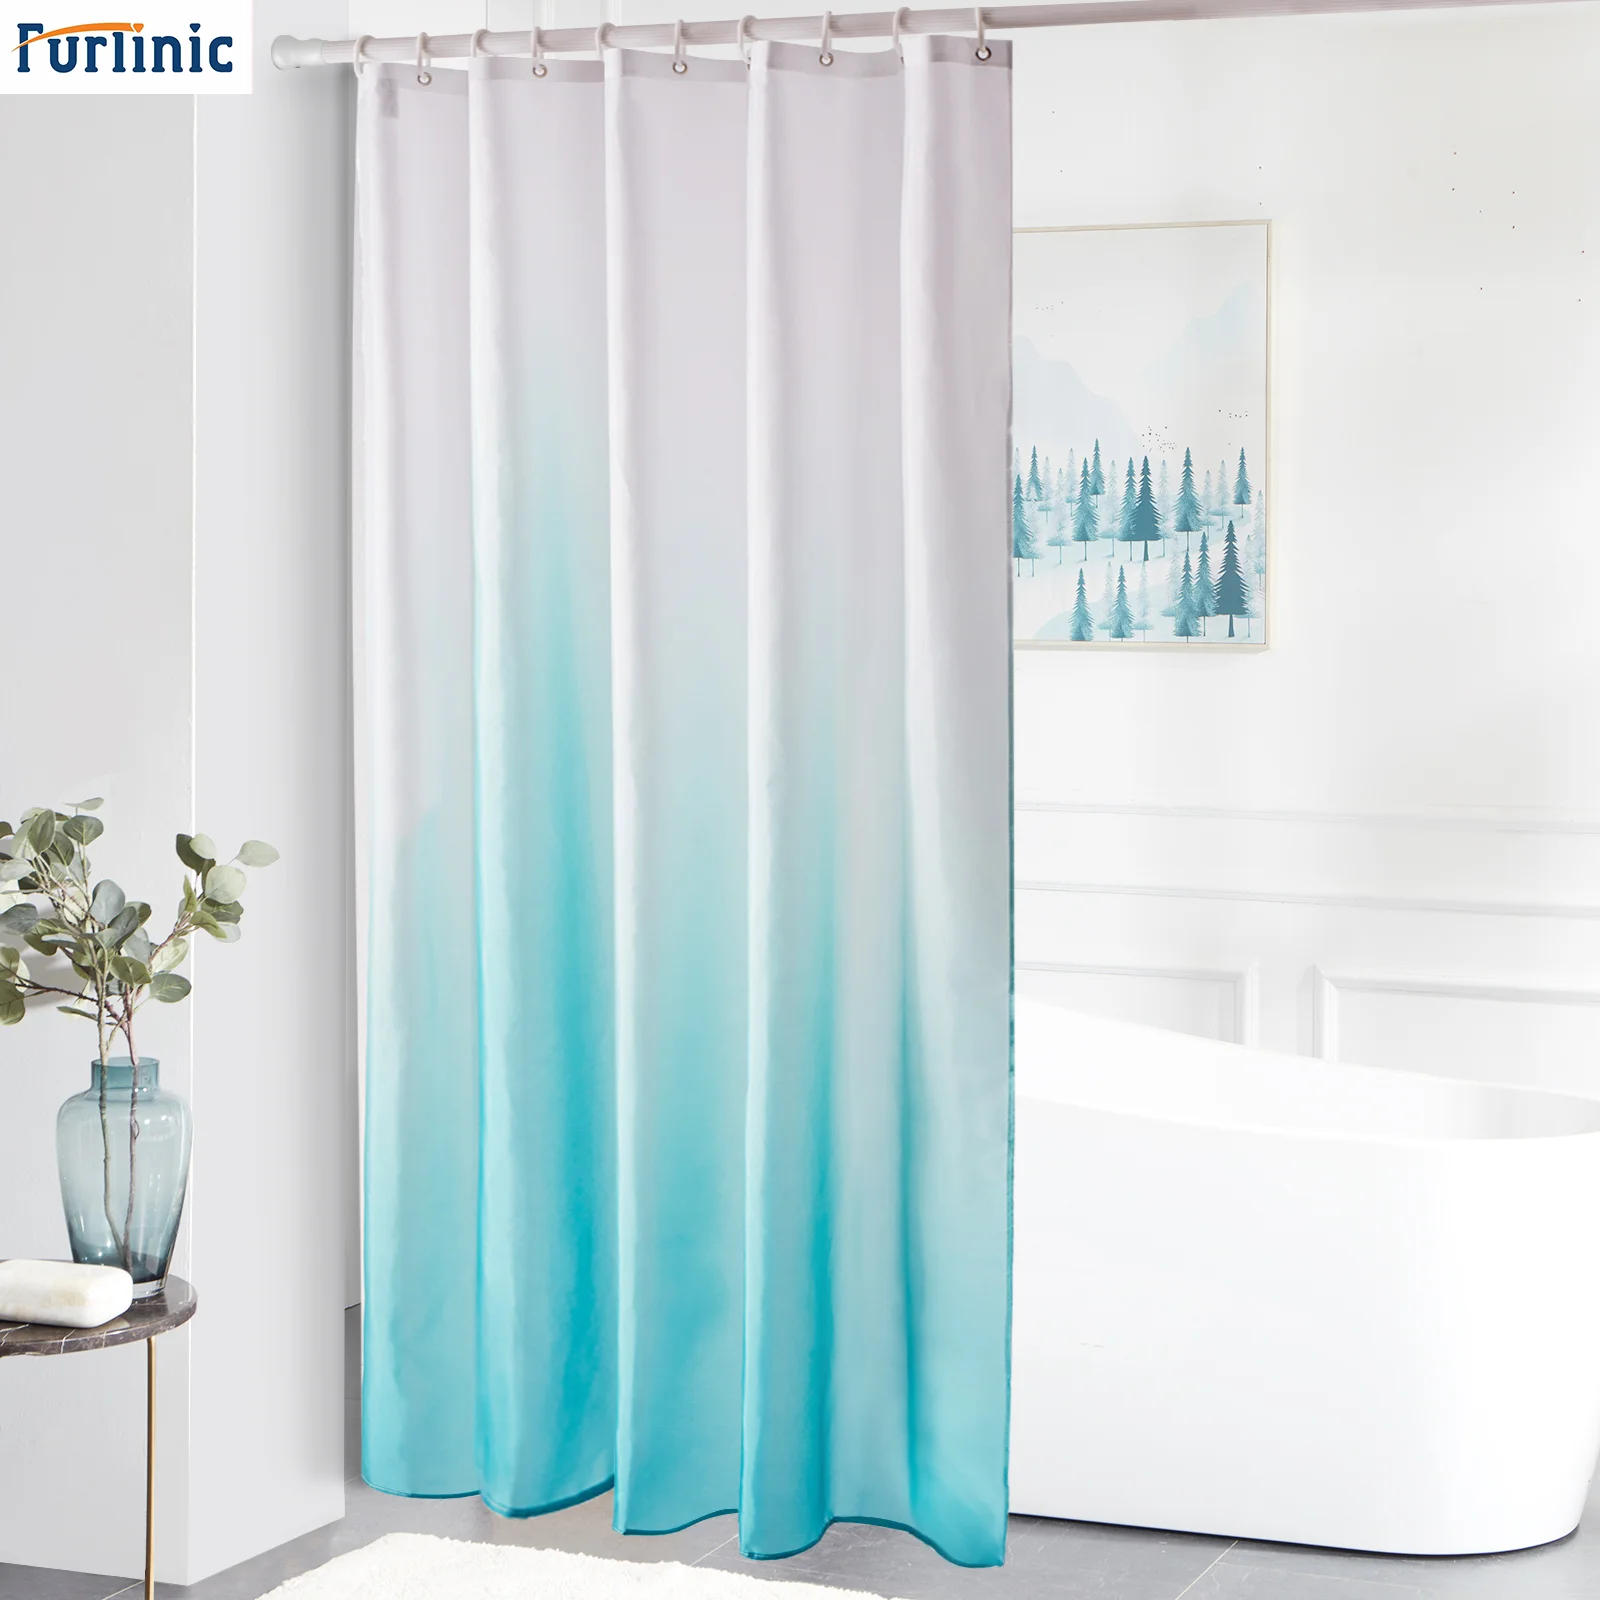 Details about   Bathtub Covers Waterproof Curtains Modern Nordic Polyester Curtain With Hook New 